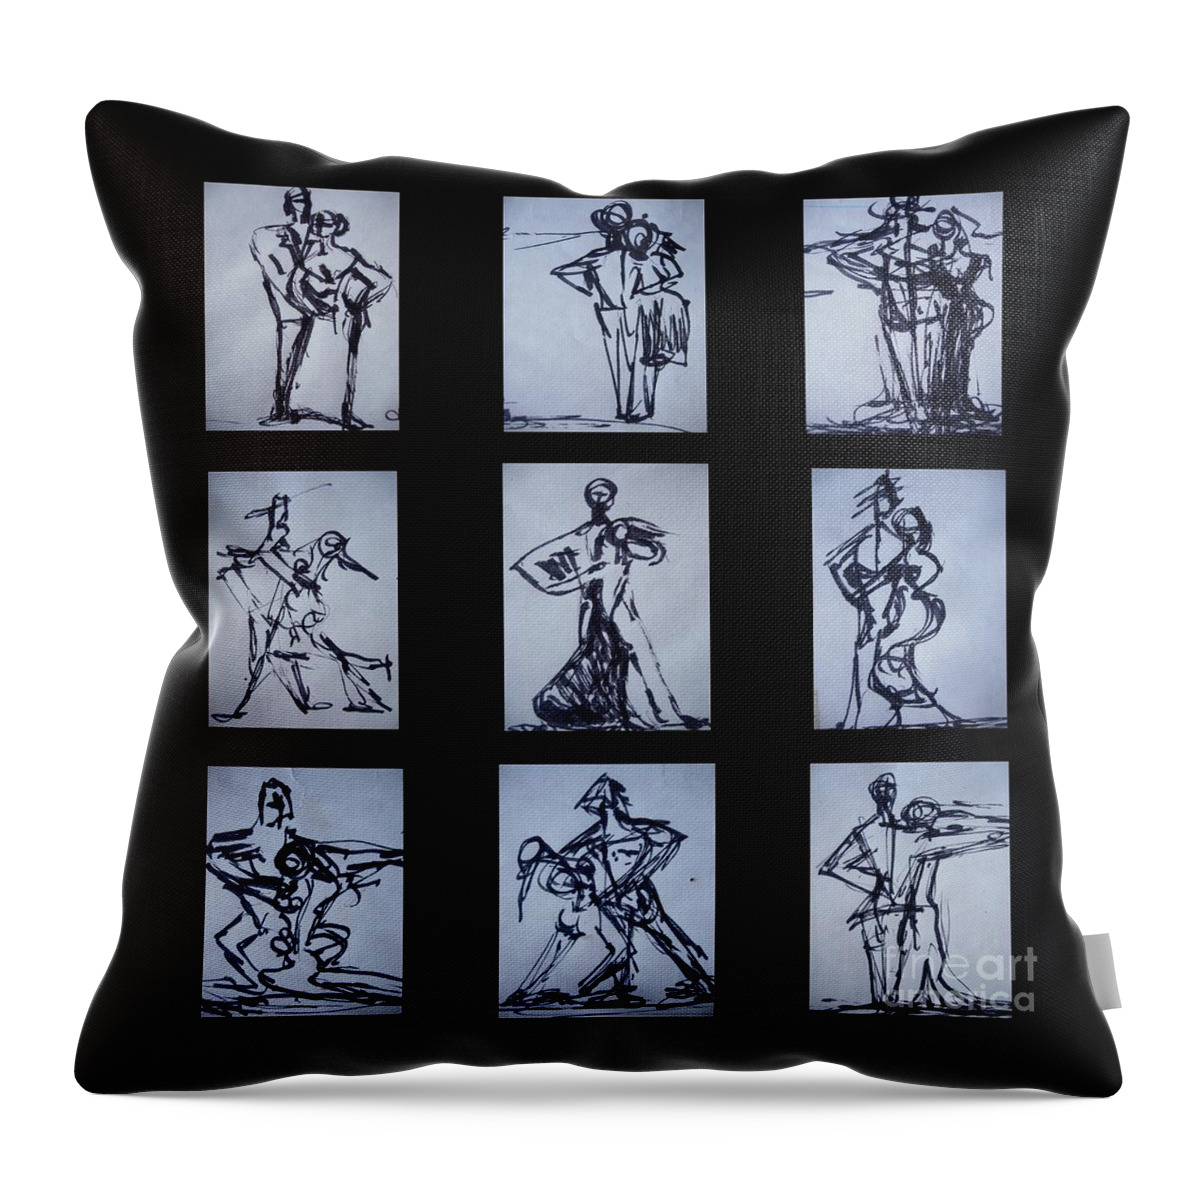 Dance Throw Pillow featuring the drawing Ballroom Dancing by Diane montana Jansson